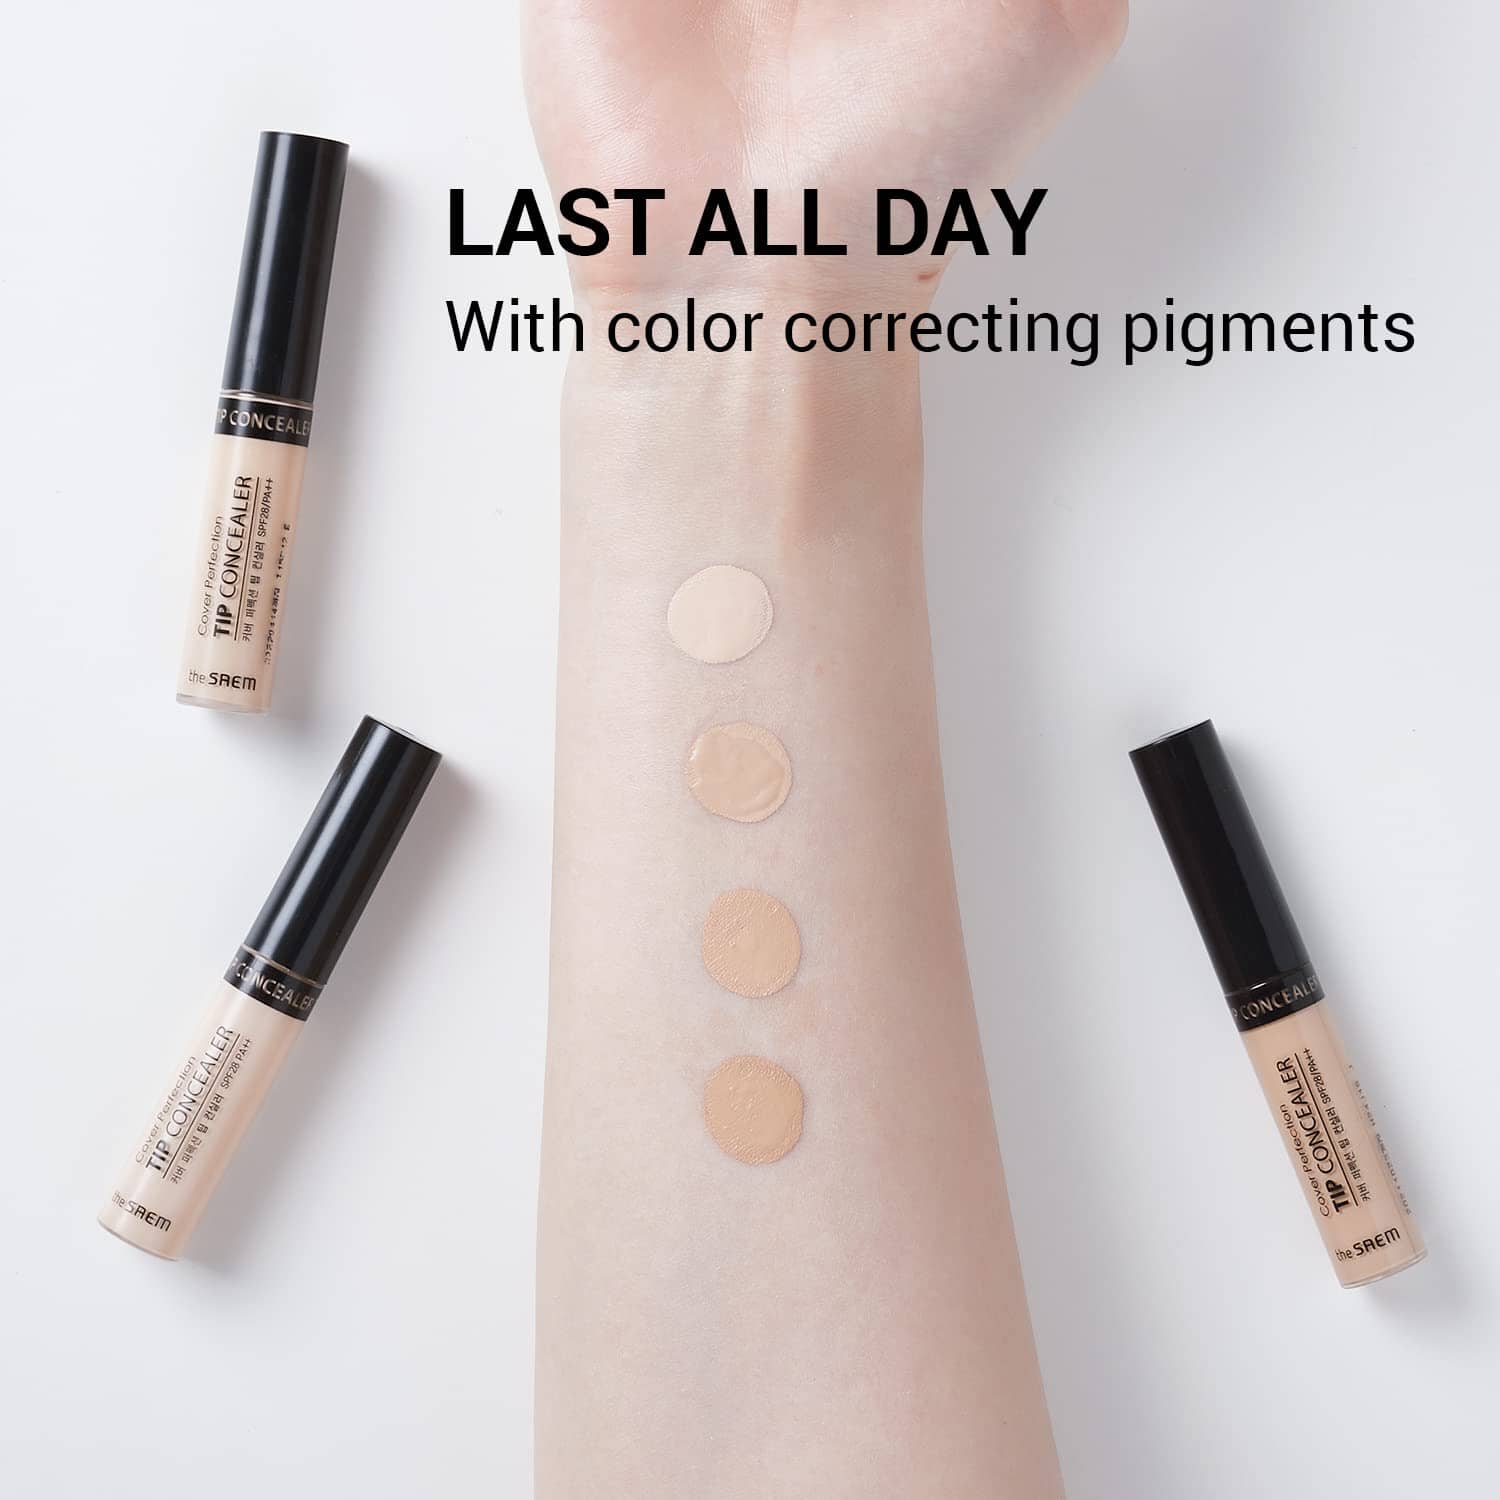 THE SAEM Cover Perfection Tip Concealer SPF 28 PA++ 